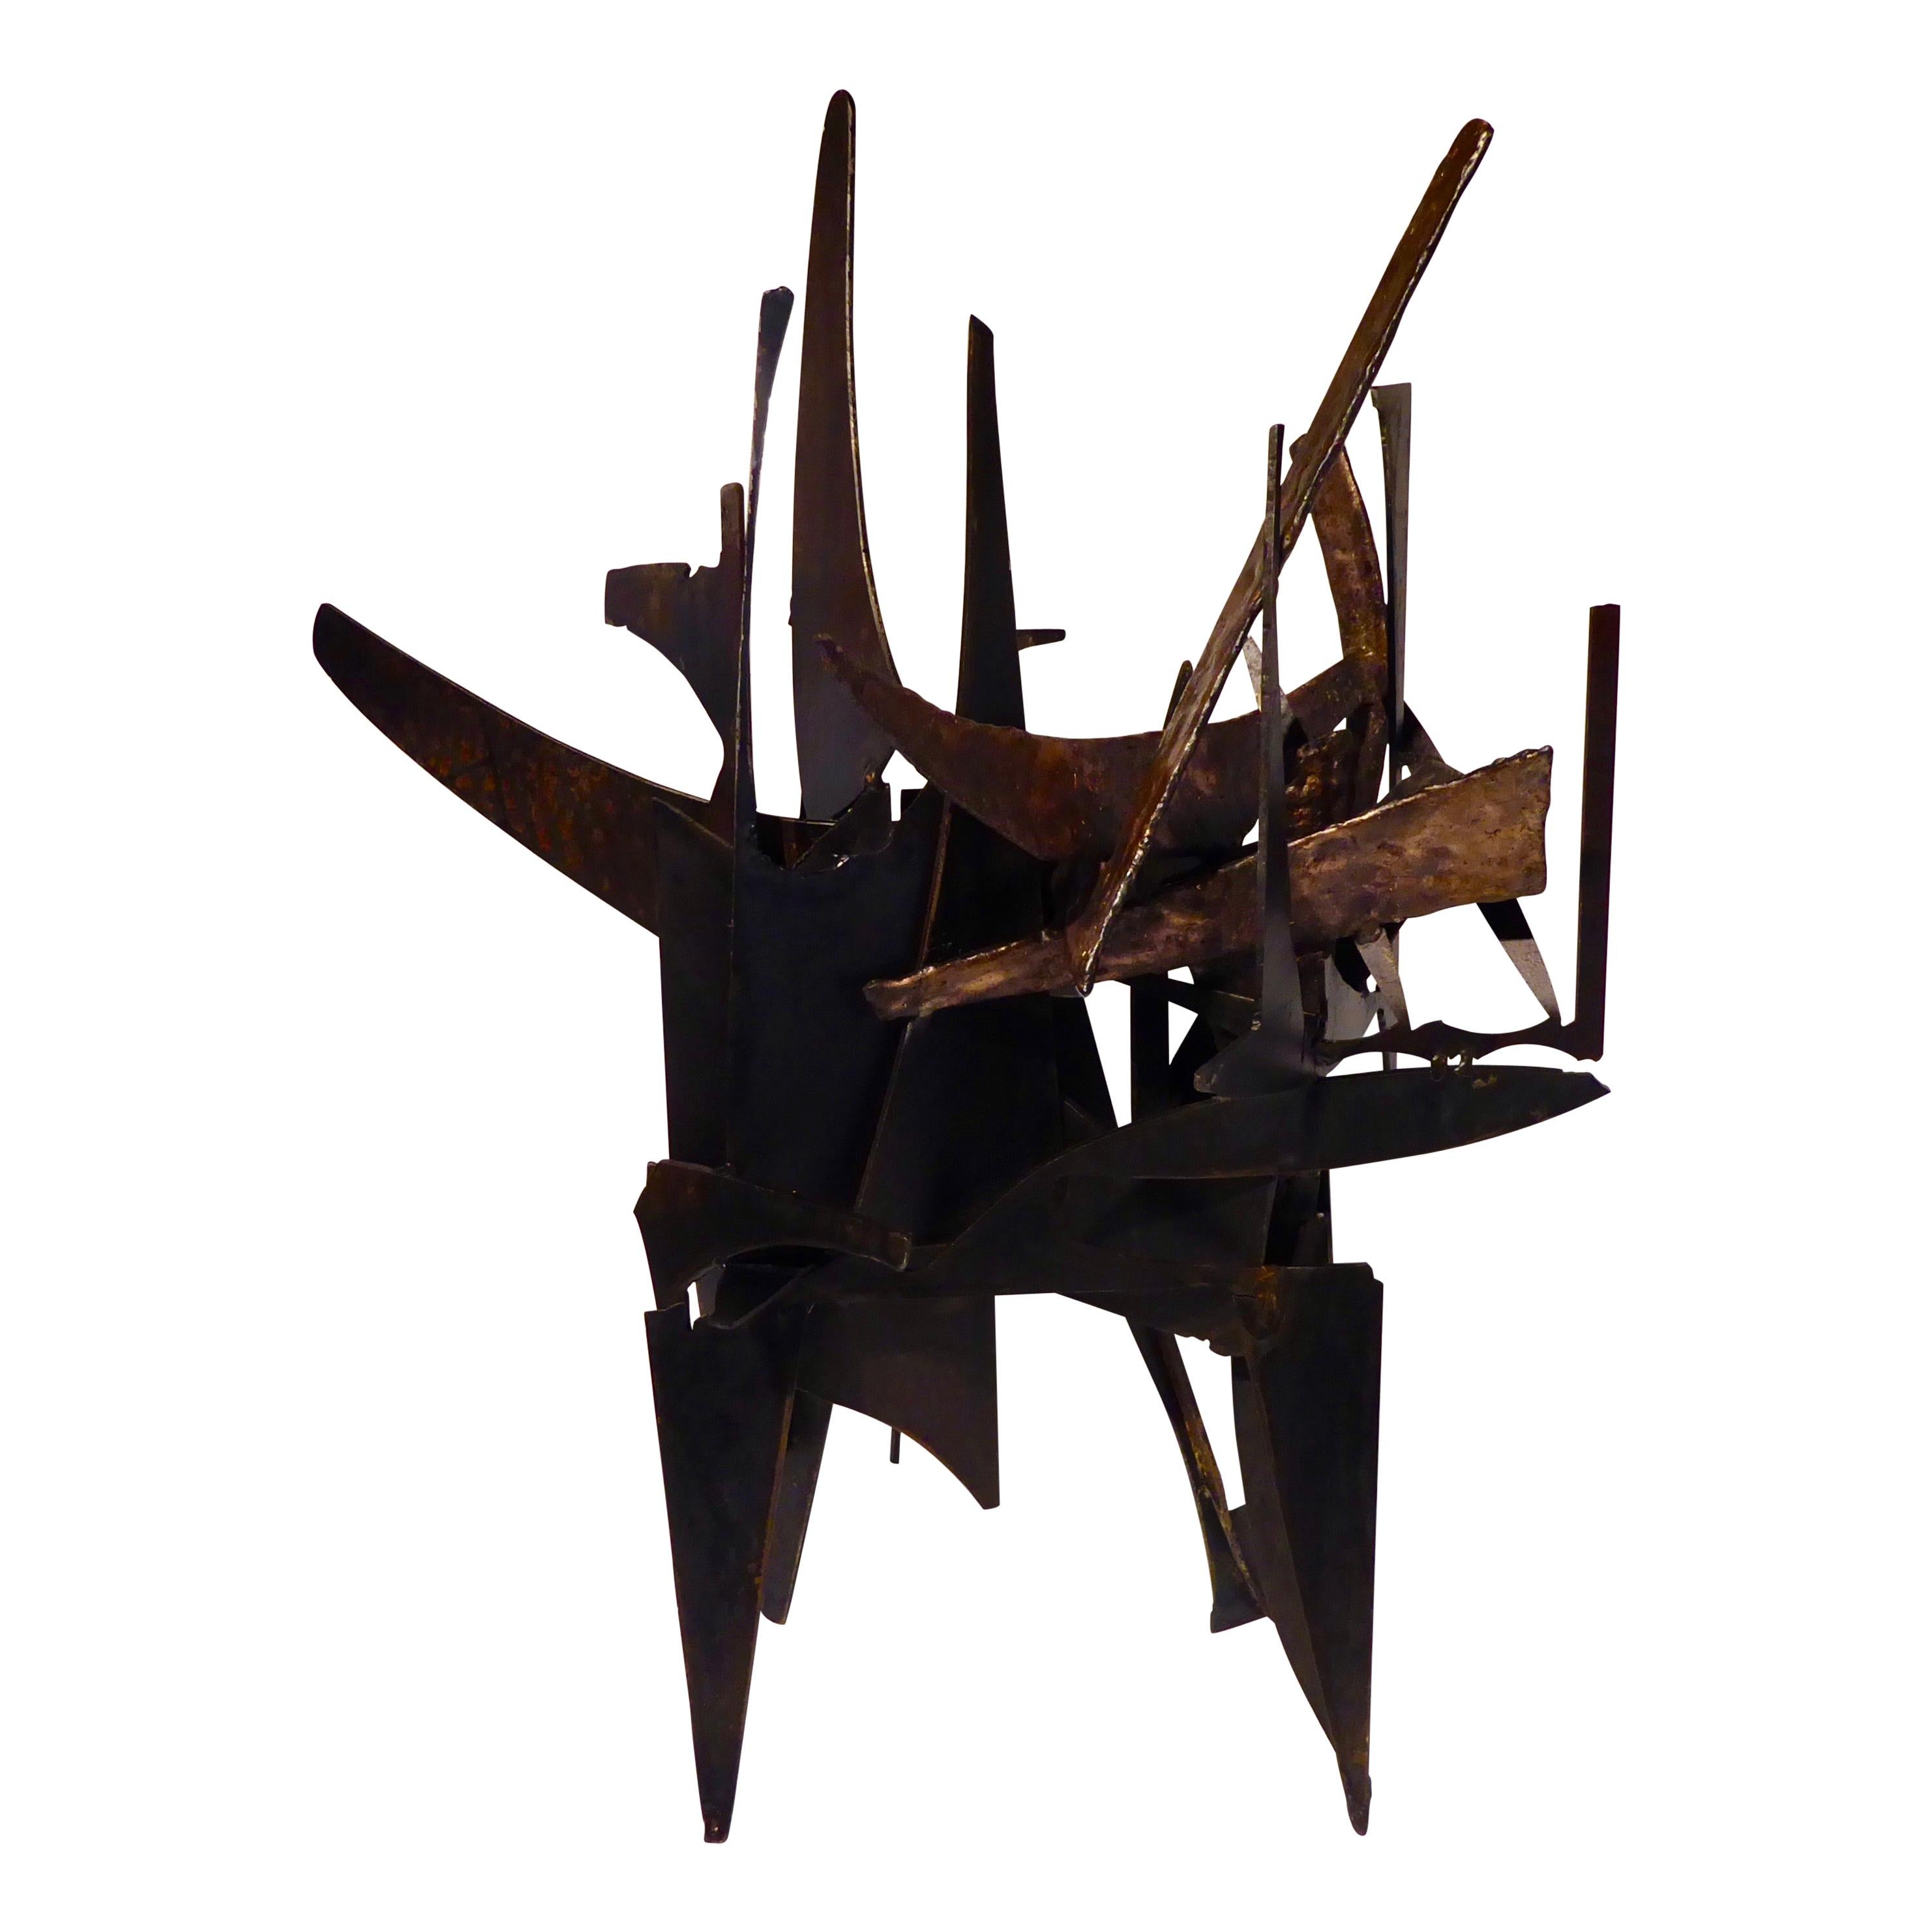 "Four Corners" an Original Steel and Bronze Sculpture by Joey Vaiasuso For Sale